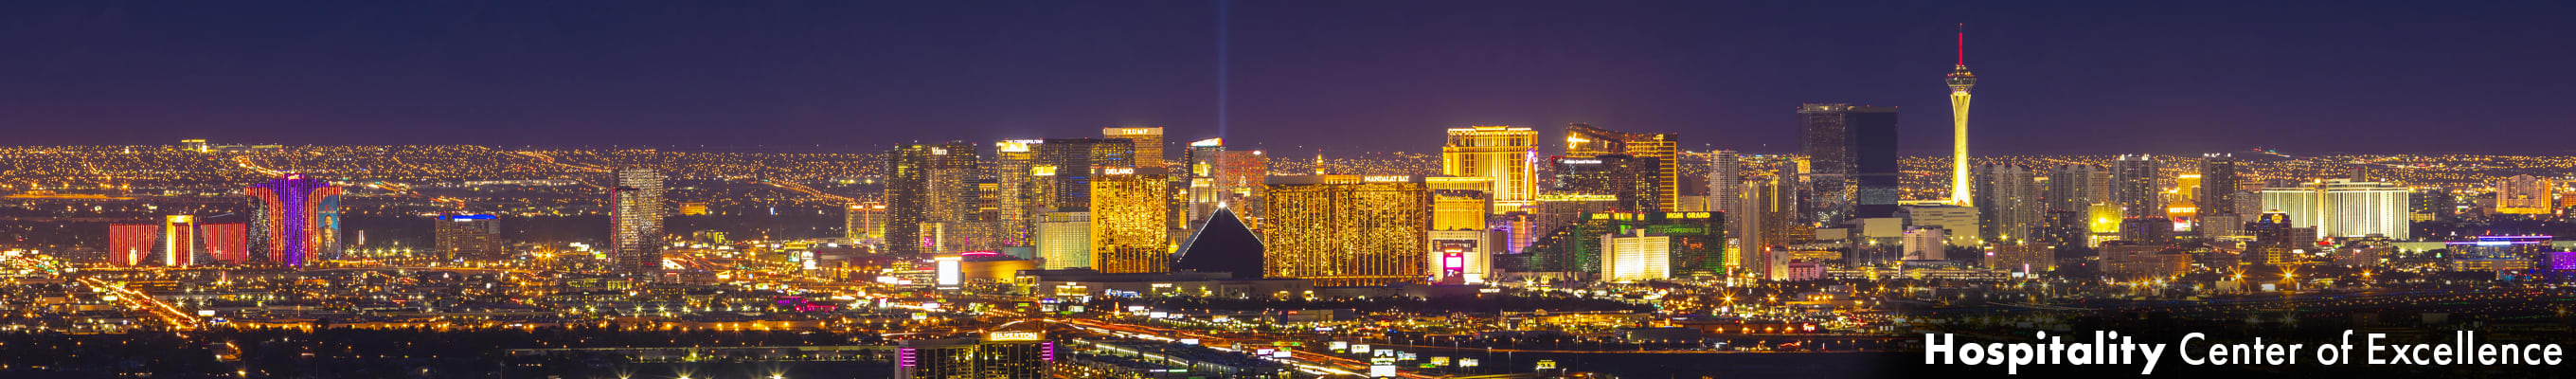 a view of the city of Las Vegas at night. The builds full of gold light